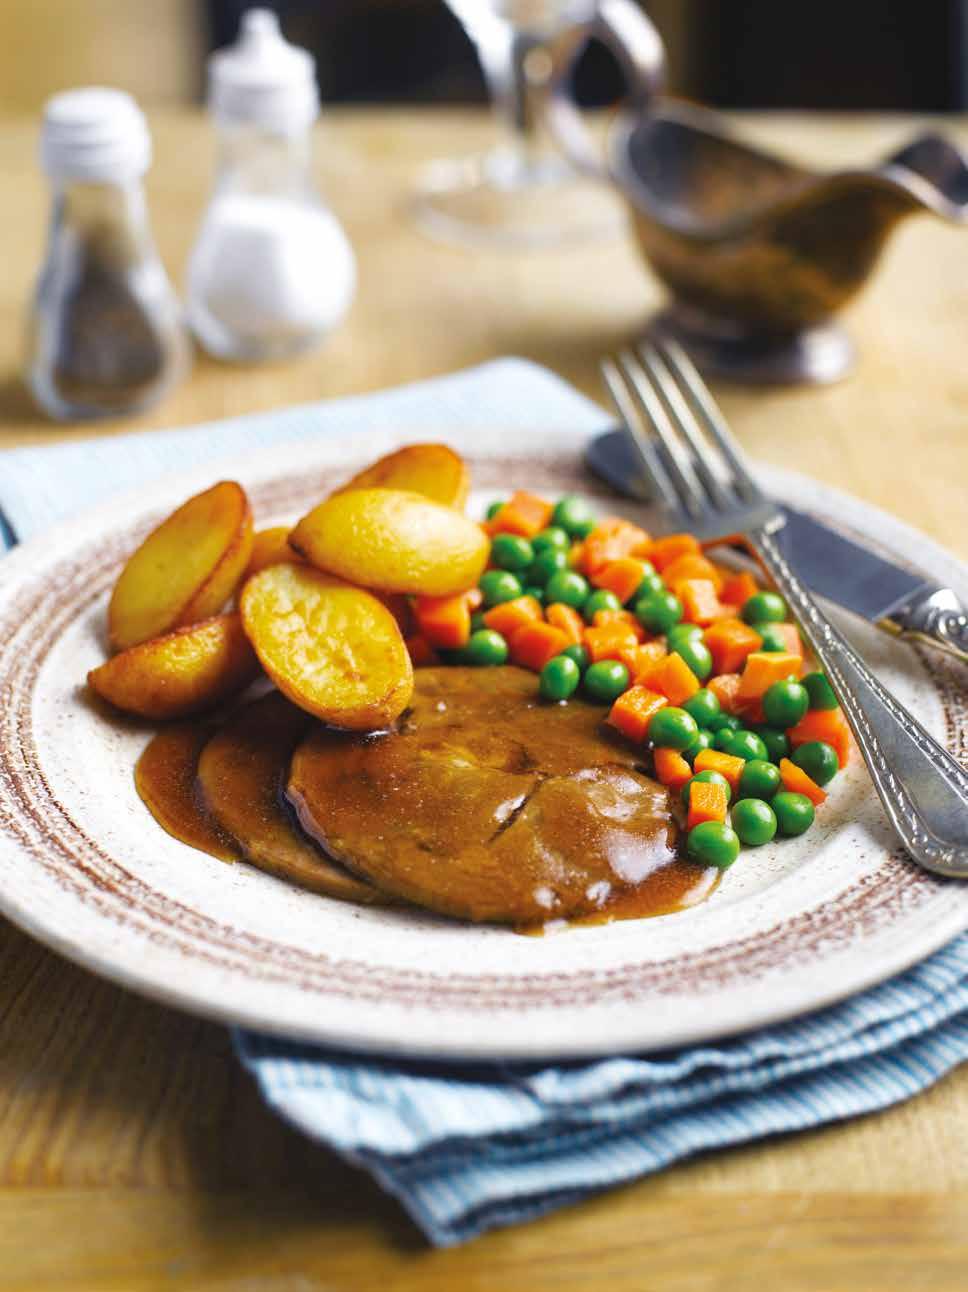 360g 379g 340g 237 239 240 324 Lamb in Gravy Lamb & Vegetable Casserole Lancashire Hotpot Liver & Bacon Casserole Two tender slices of formed lamb in gravy, served with roast potatoes, carrots and